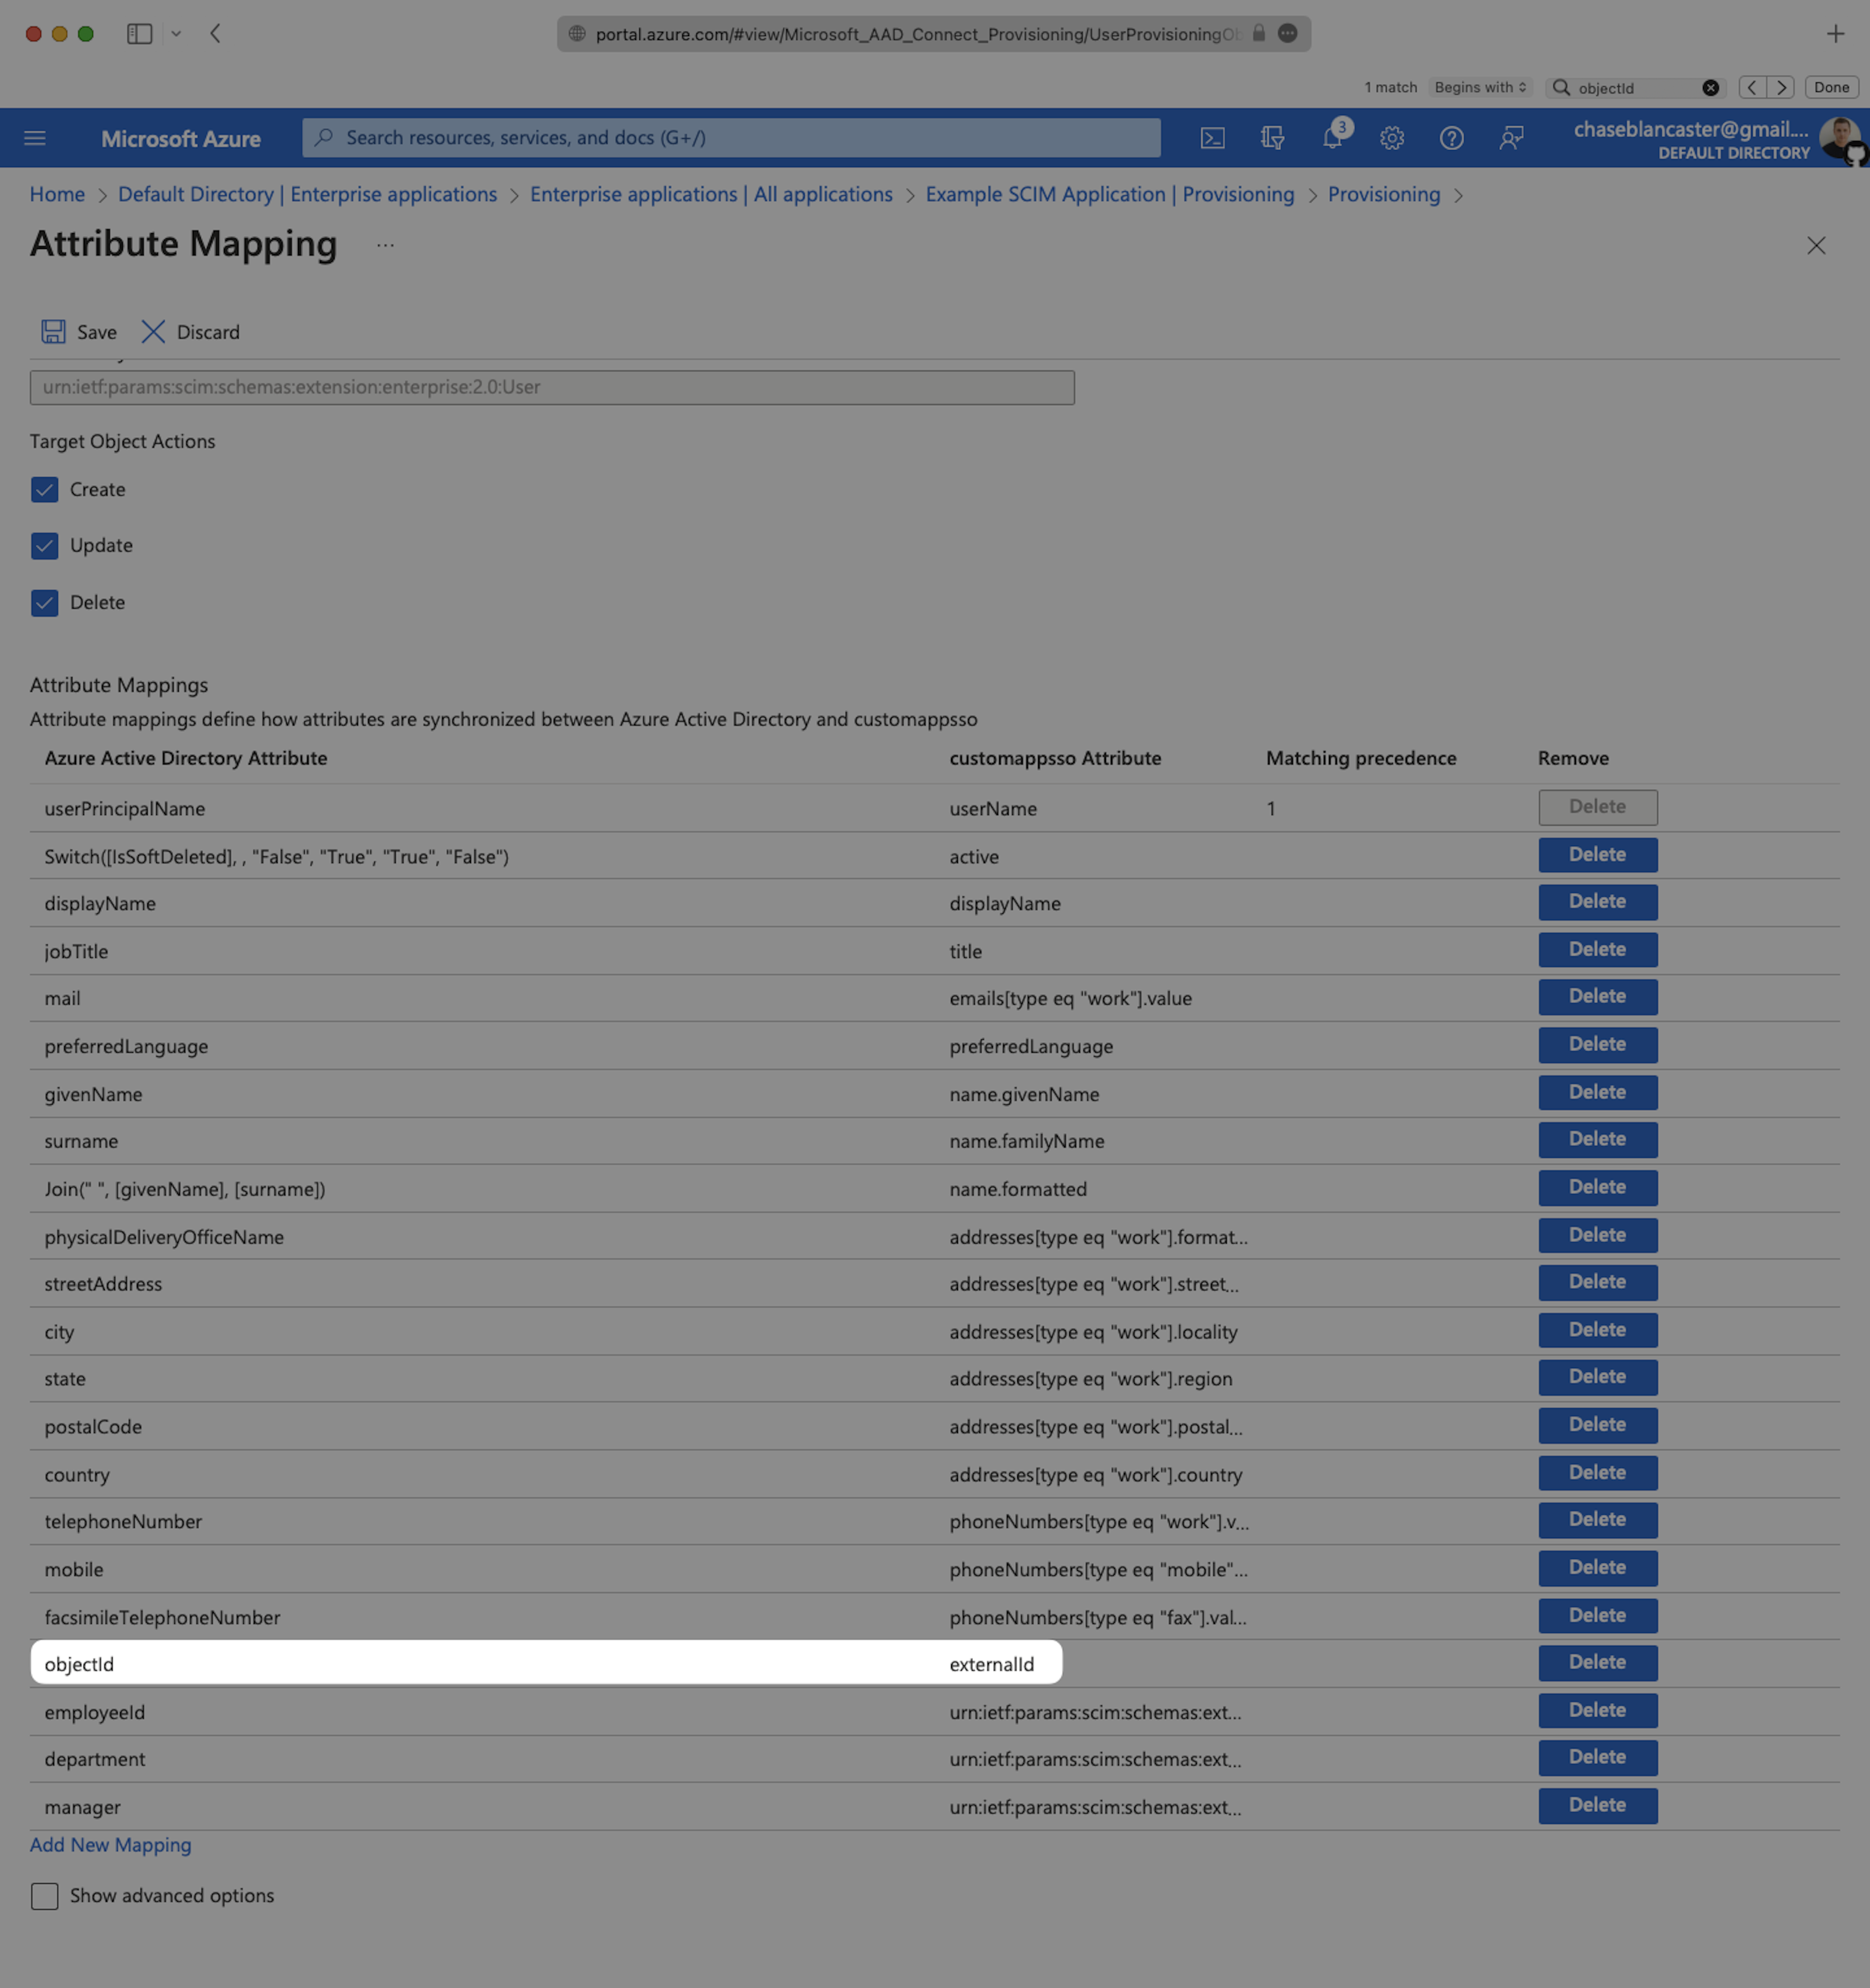 A screenshot showing where to ensure 'objectId' is mapped to 'externalId' in the Attribute Mapping section in Azure.